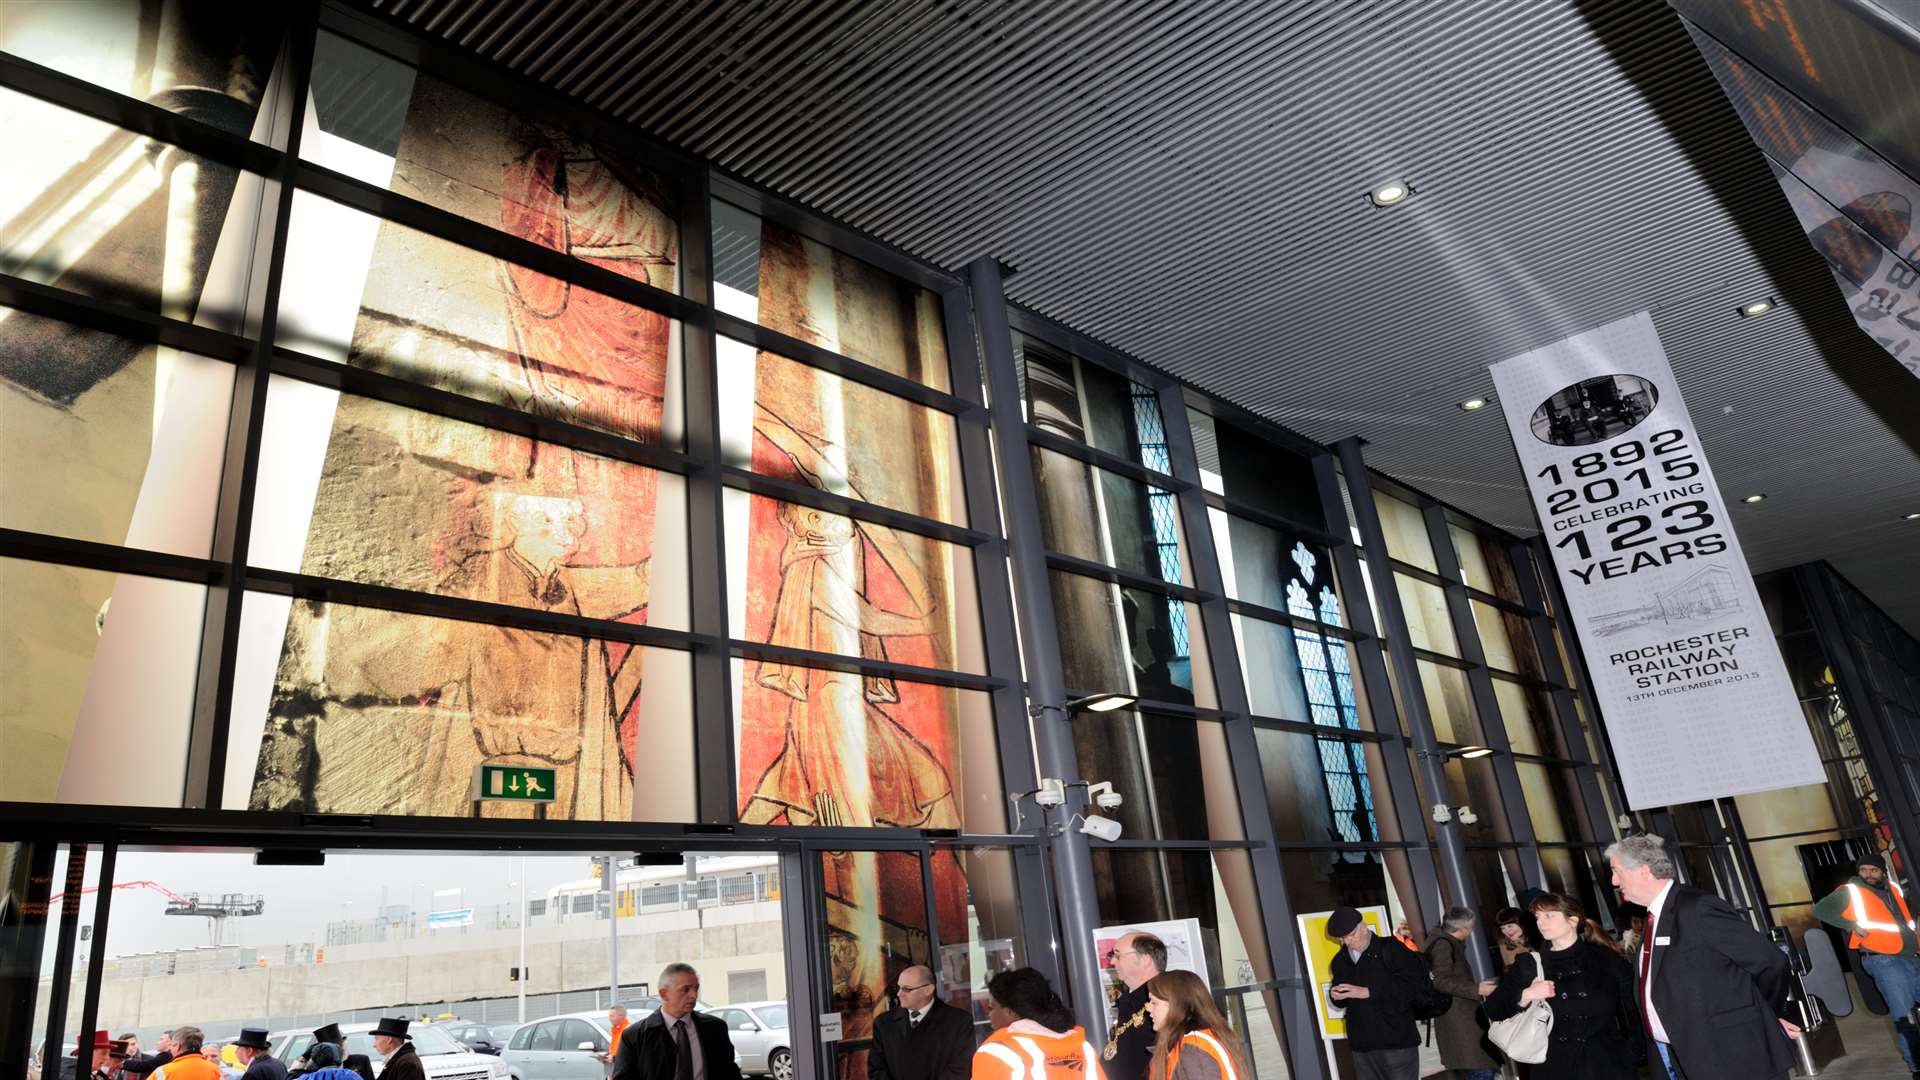 Rochester's new railway station features a display celebrating the historic city's heritage.